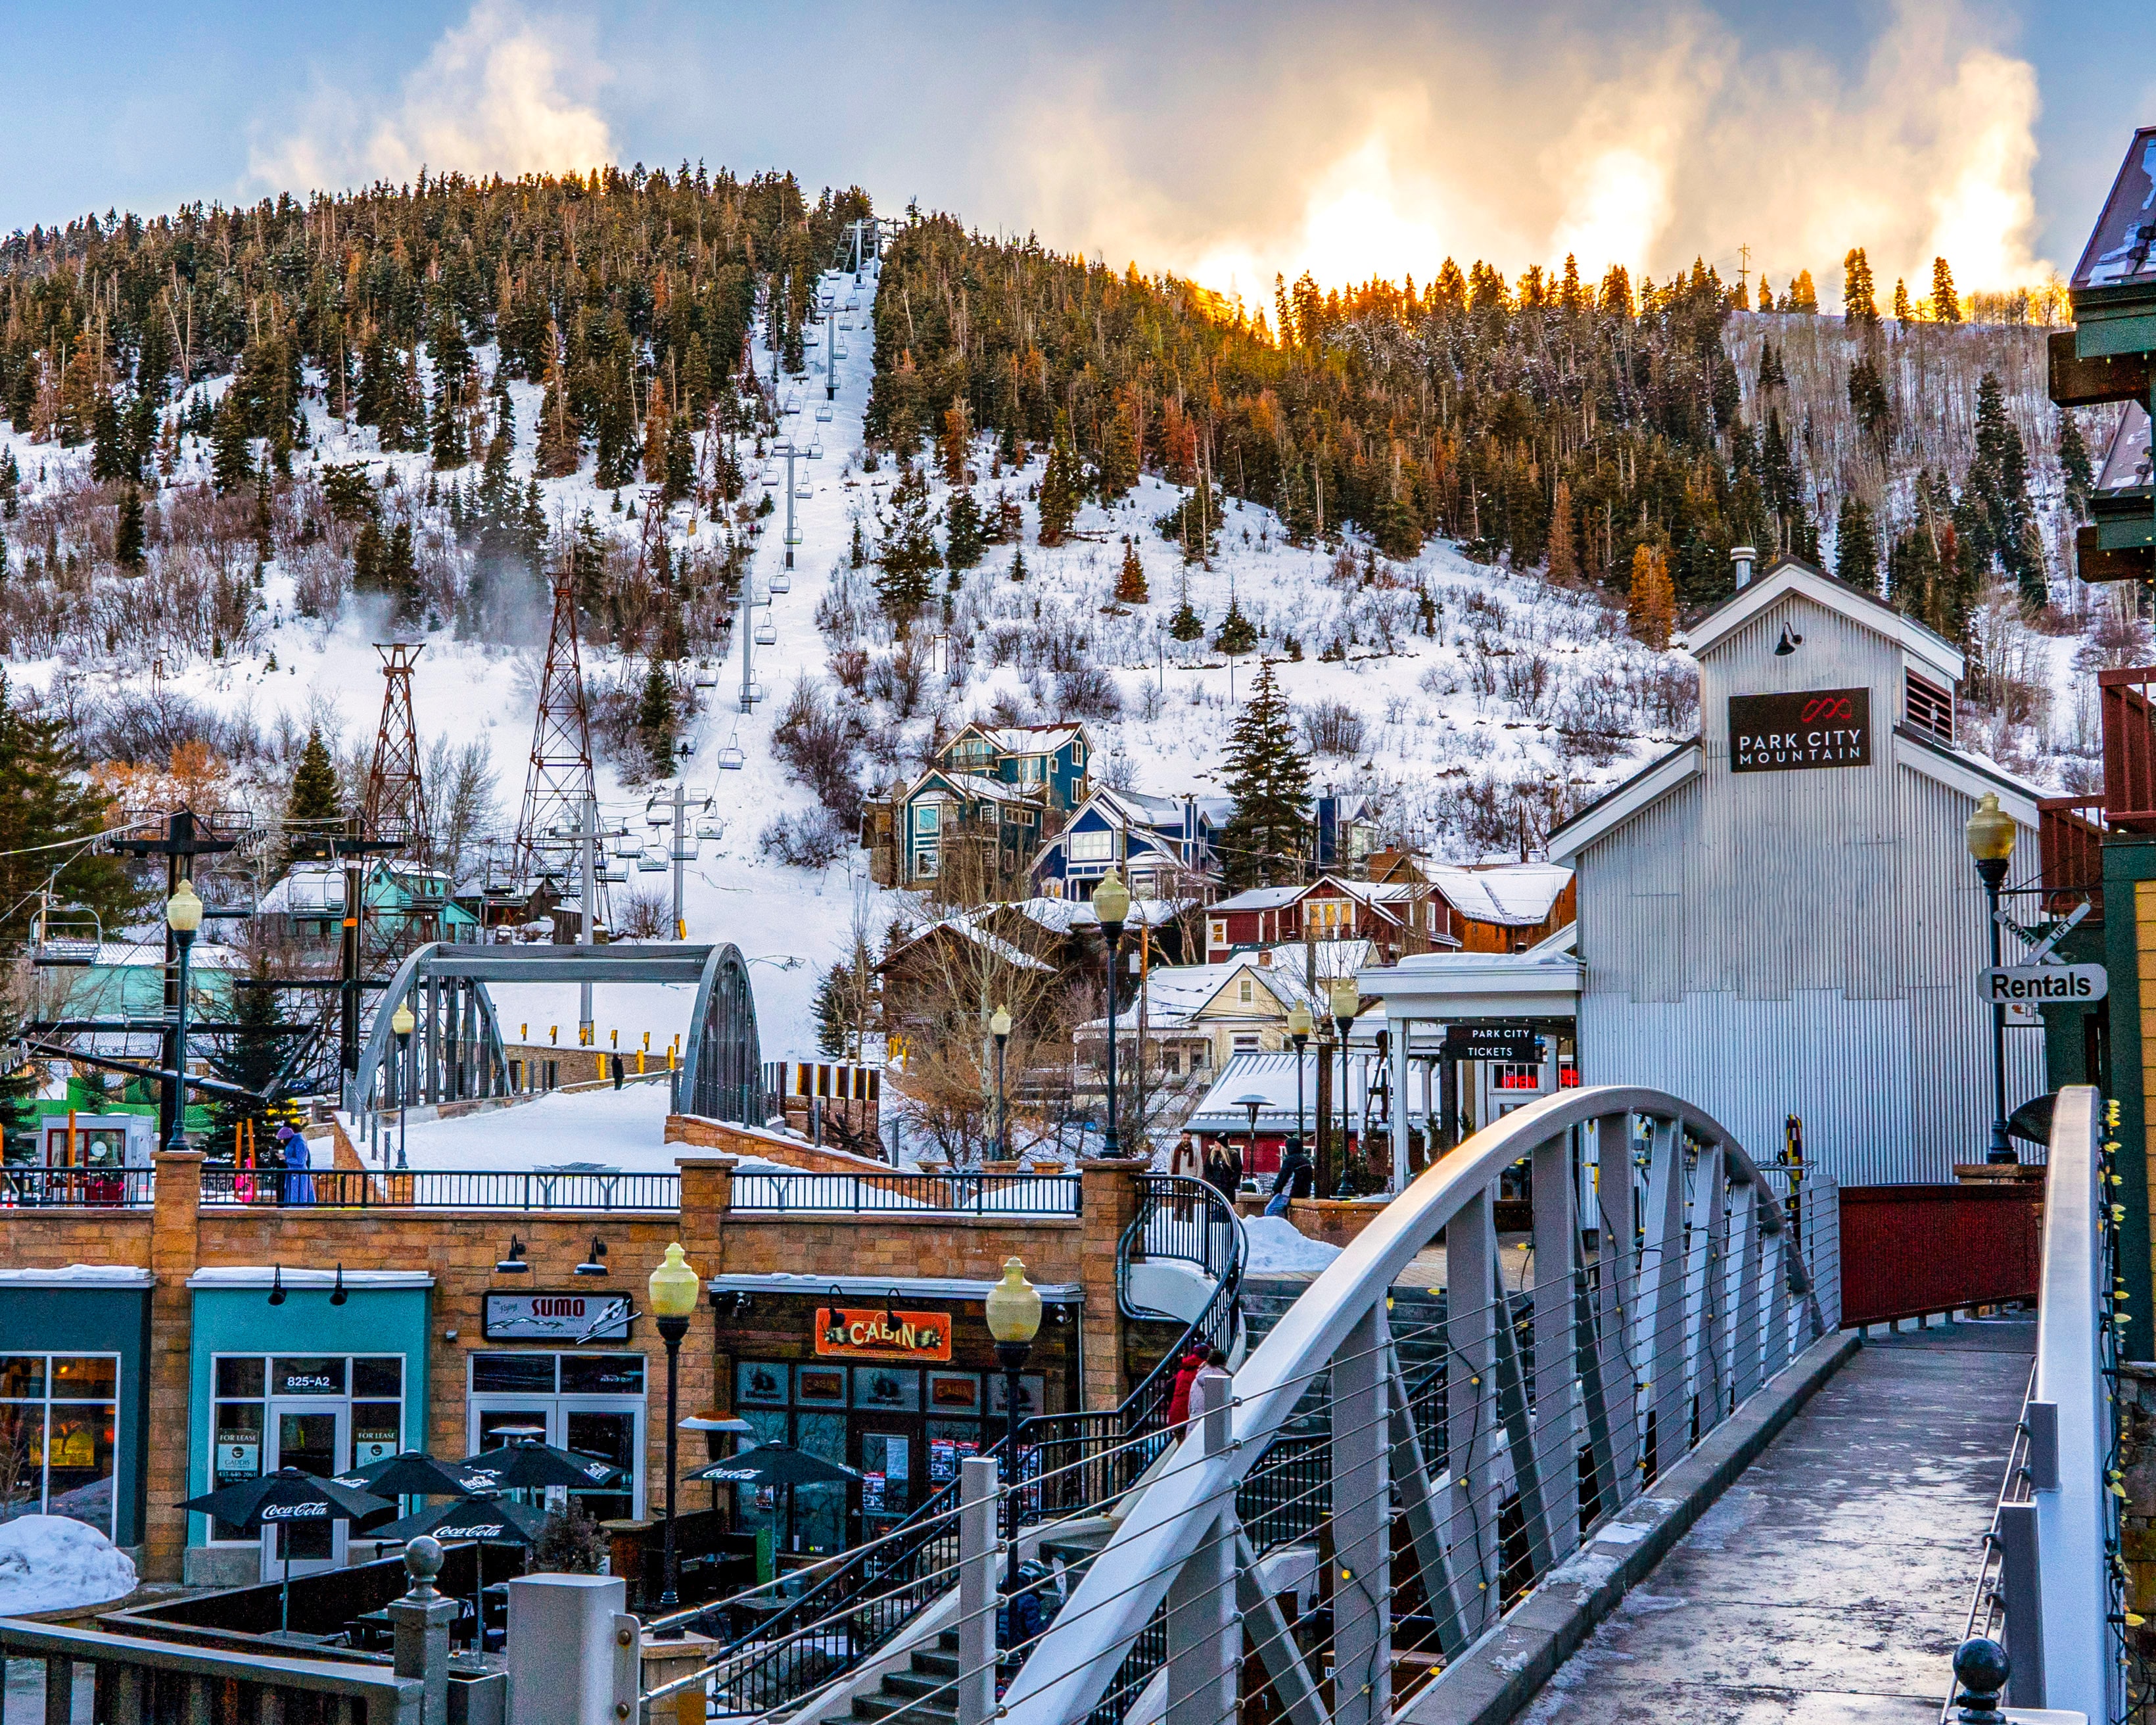 Nearly 43% of Housing Units in Park City are Short-Term Rentals